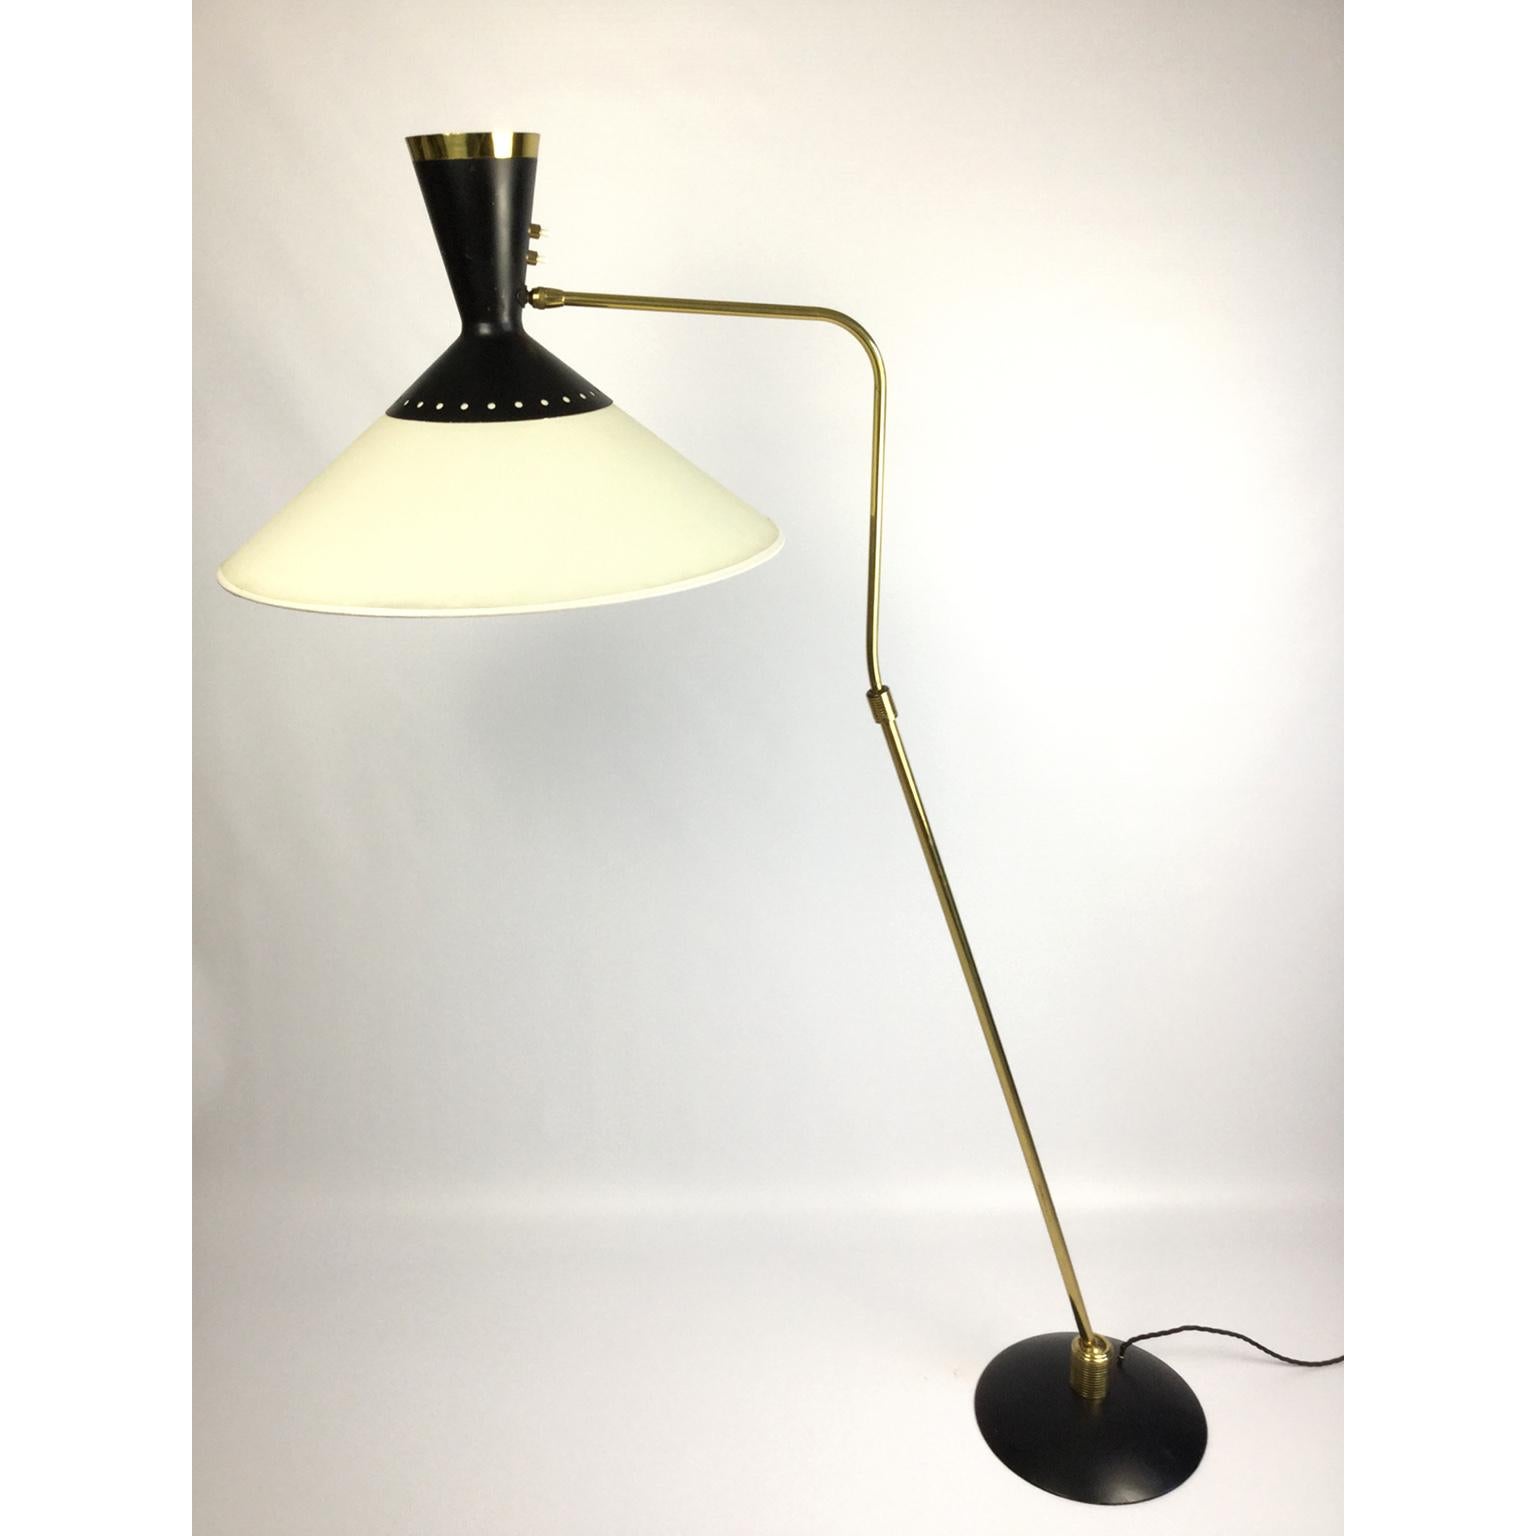 20th Century French Brass Flexible and Extendable Floor Lamp by Maison Arlus, 1950s For Sale